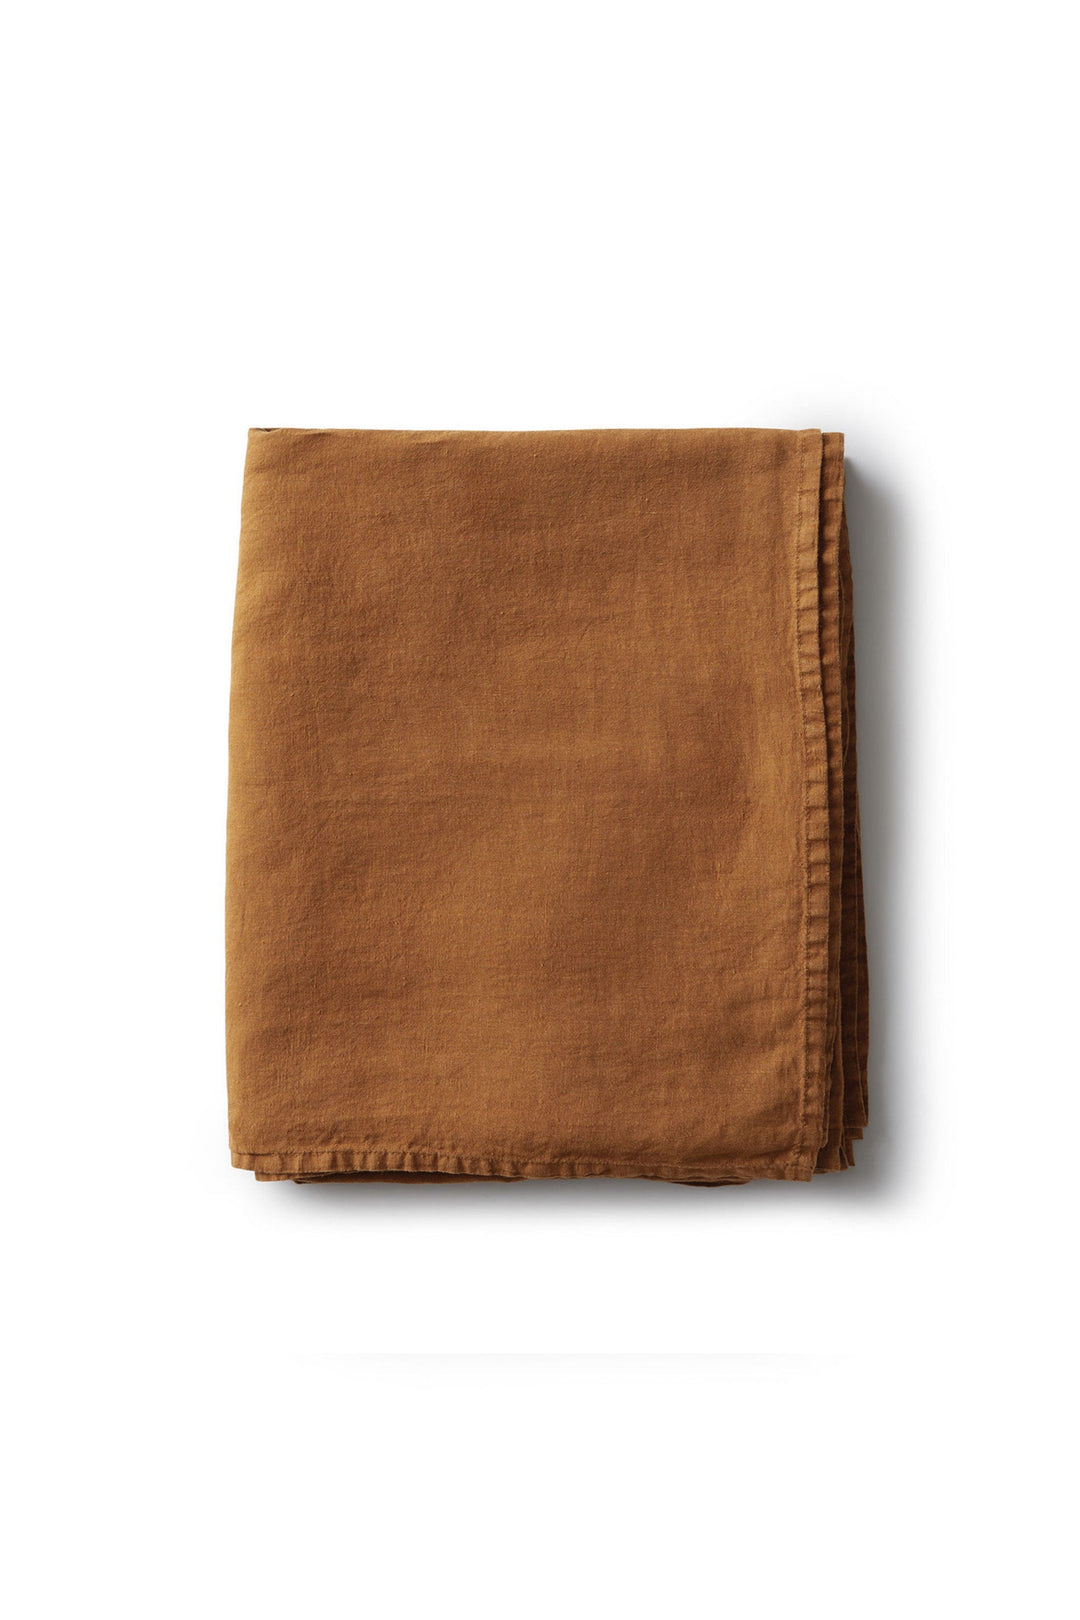 Hanna Hygge                        Tablecloth Outback